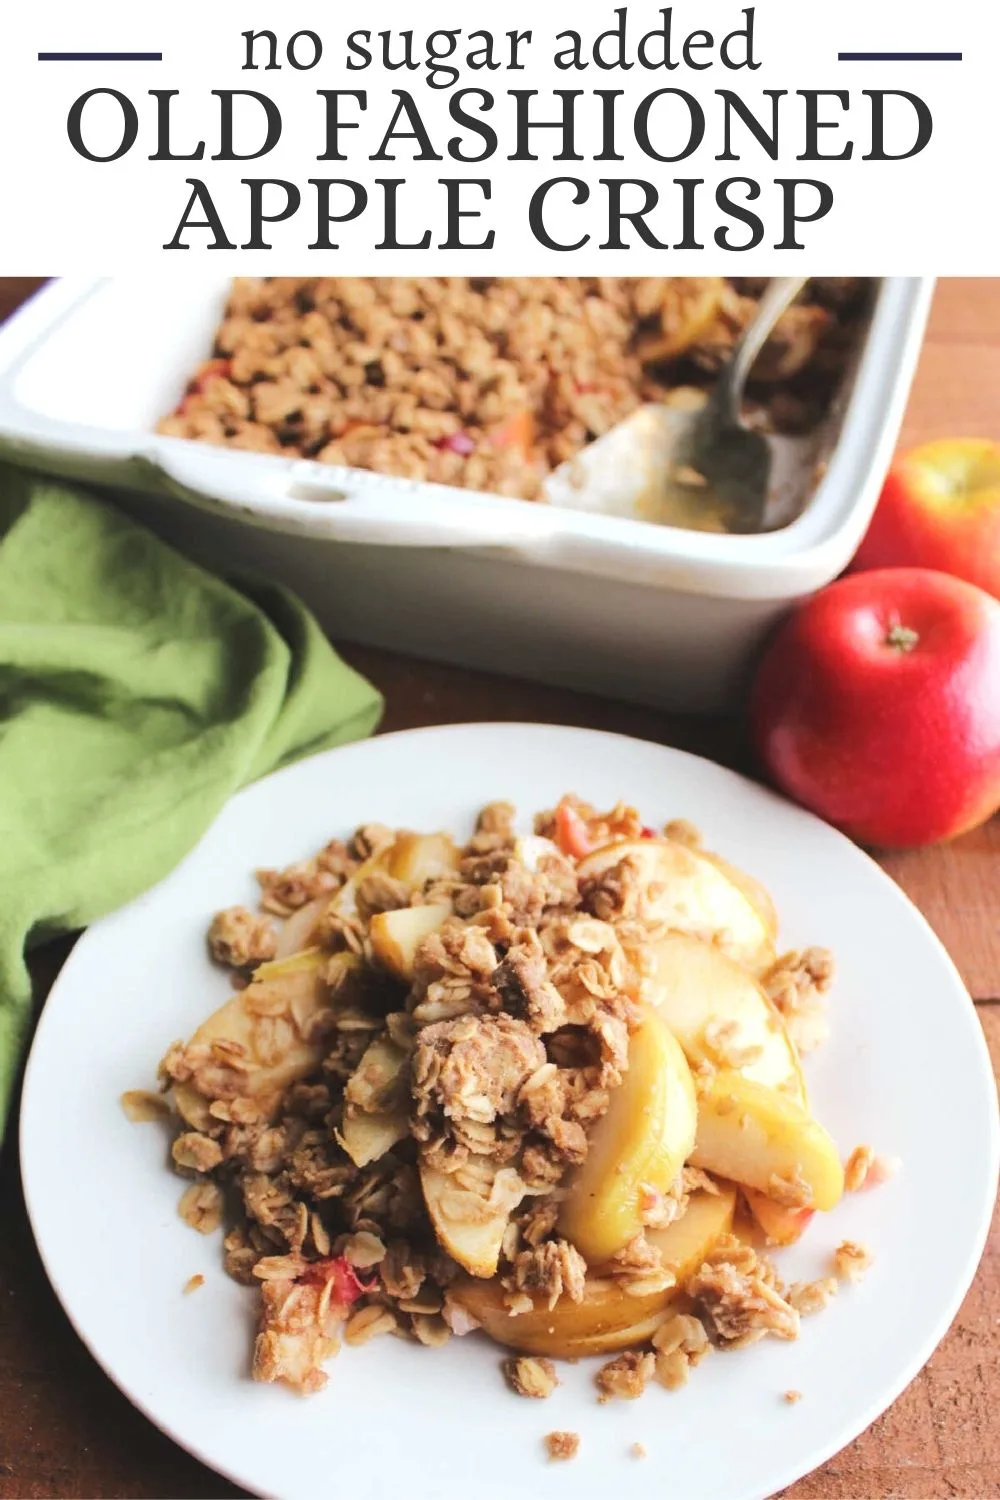 This simple apple crisp recipe comes straight from my great-grandma, so you know it has to be good. There's no added sugar, just the natural sweetness of the apples. So the fruit and the oat topping really shine through. It is great on its own and even better with a scoop of vanilla ice cream!